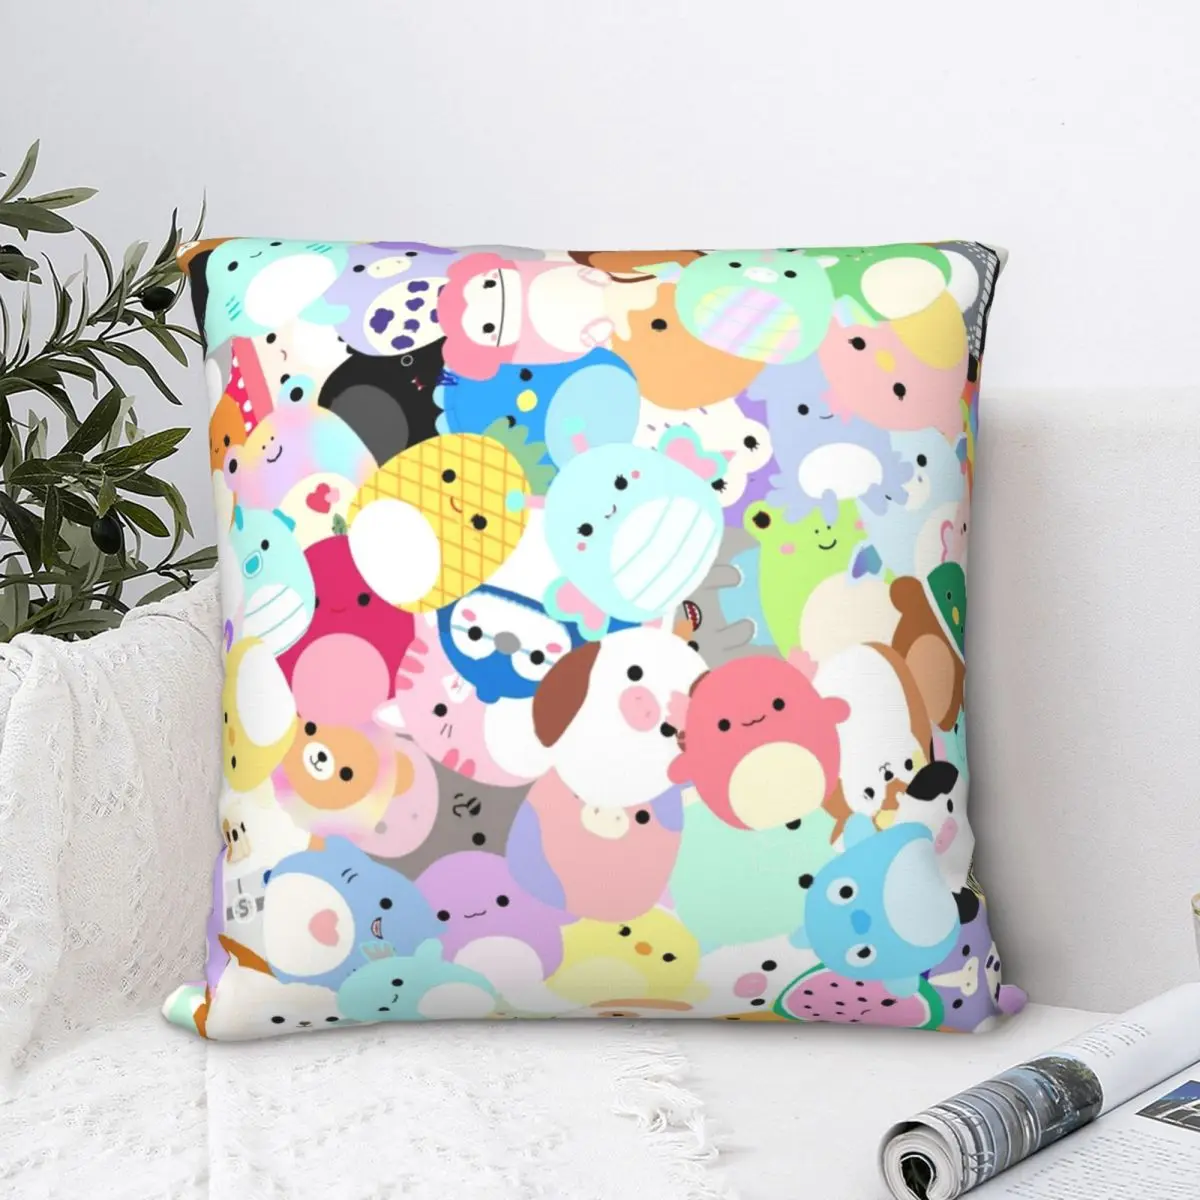 Squishmallows Square Pillowcase Cushion Cover funny Zipper Home Decorative Polyester Throw Pillow Case for Home Nordic 45*45cm